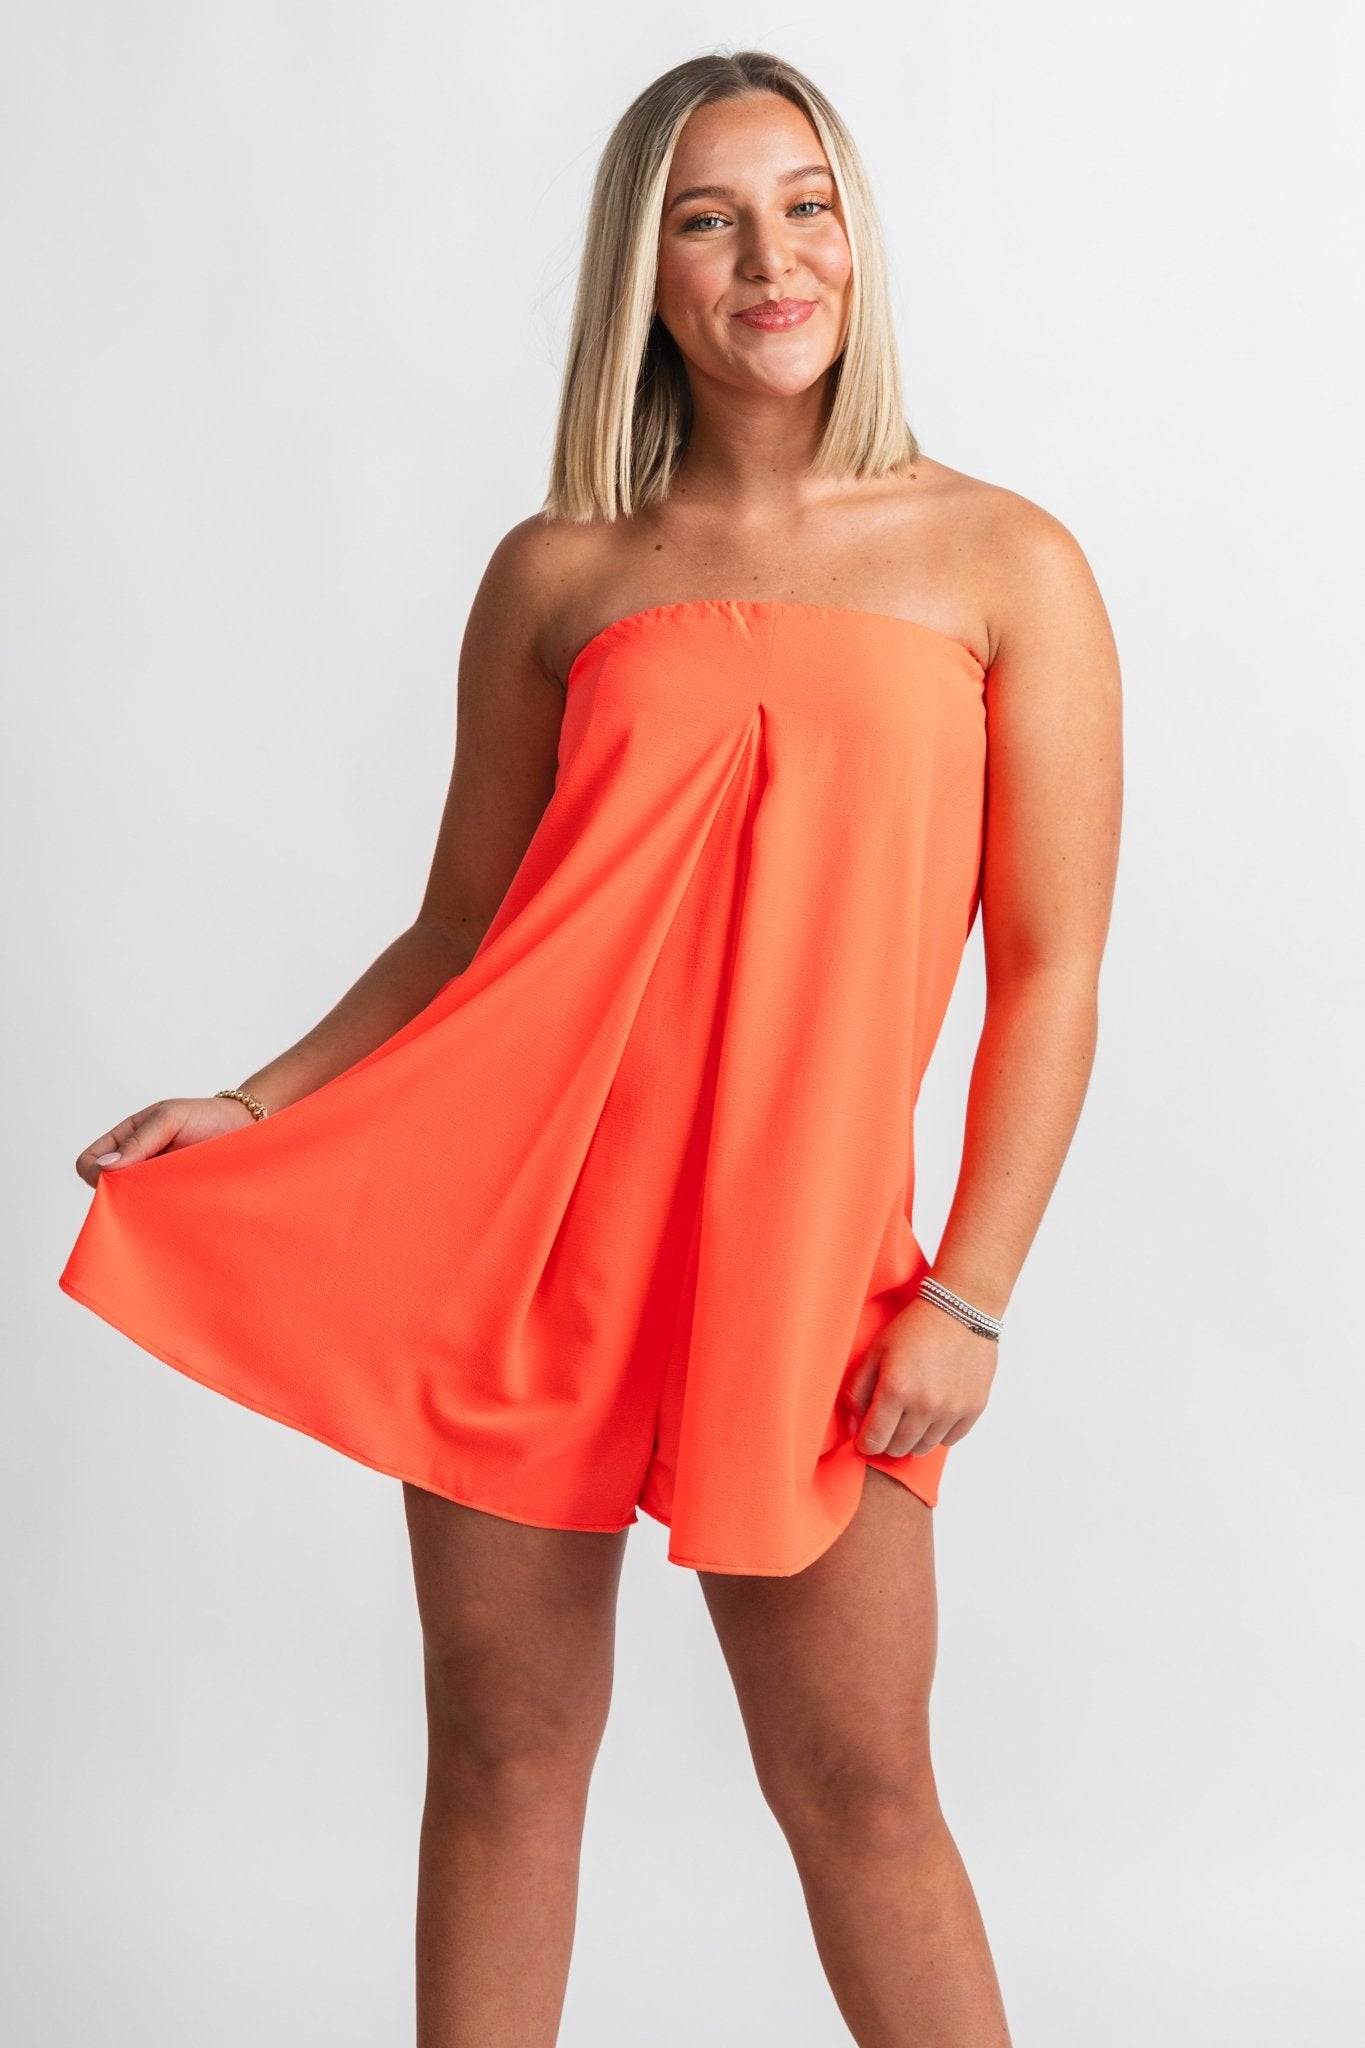 Strapless romper coral - Stylish Romper - Trendy Staycation Outfits at Lush Fashion Lounge Boutique in Oklahoma City